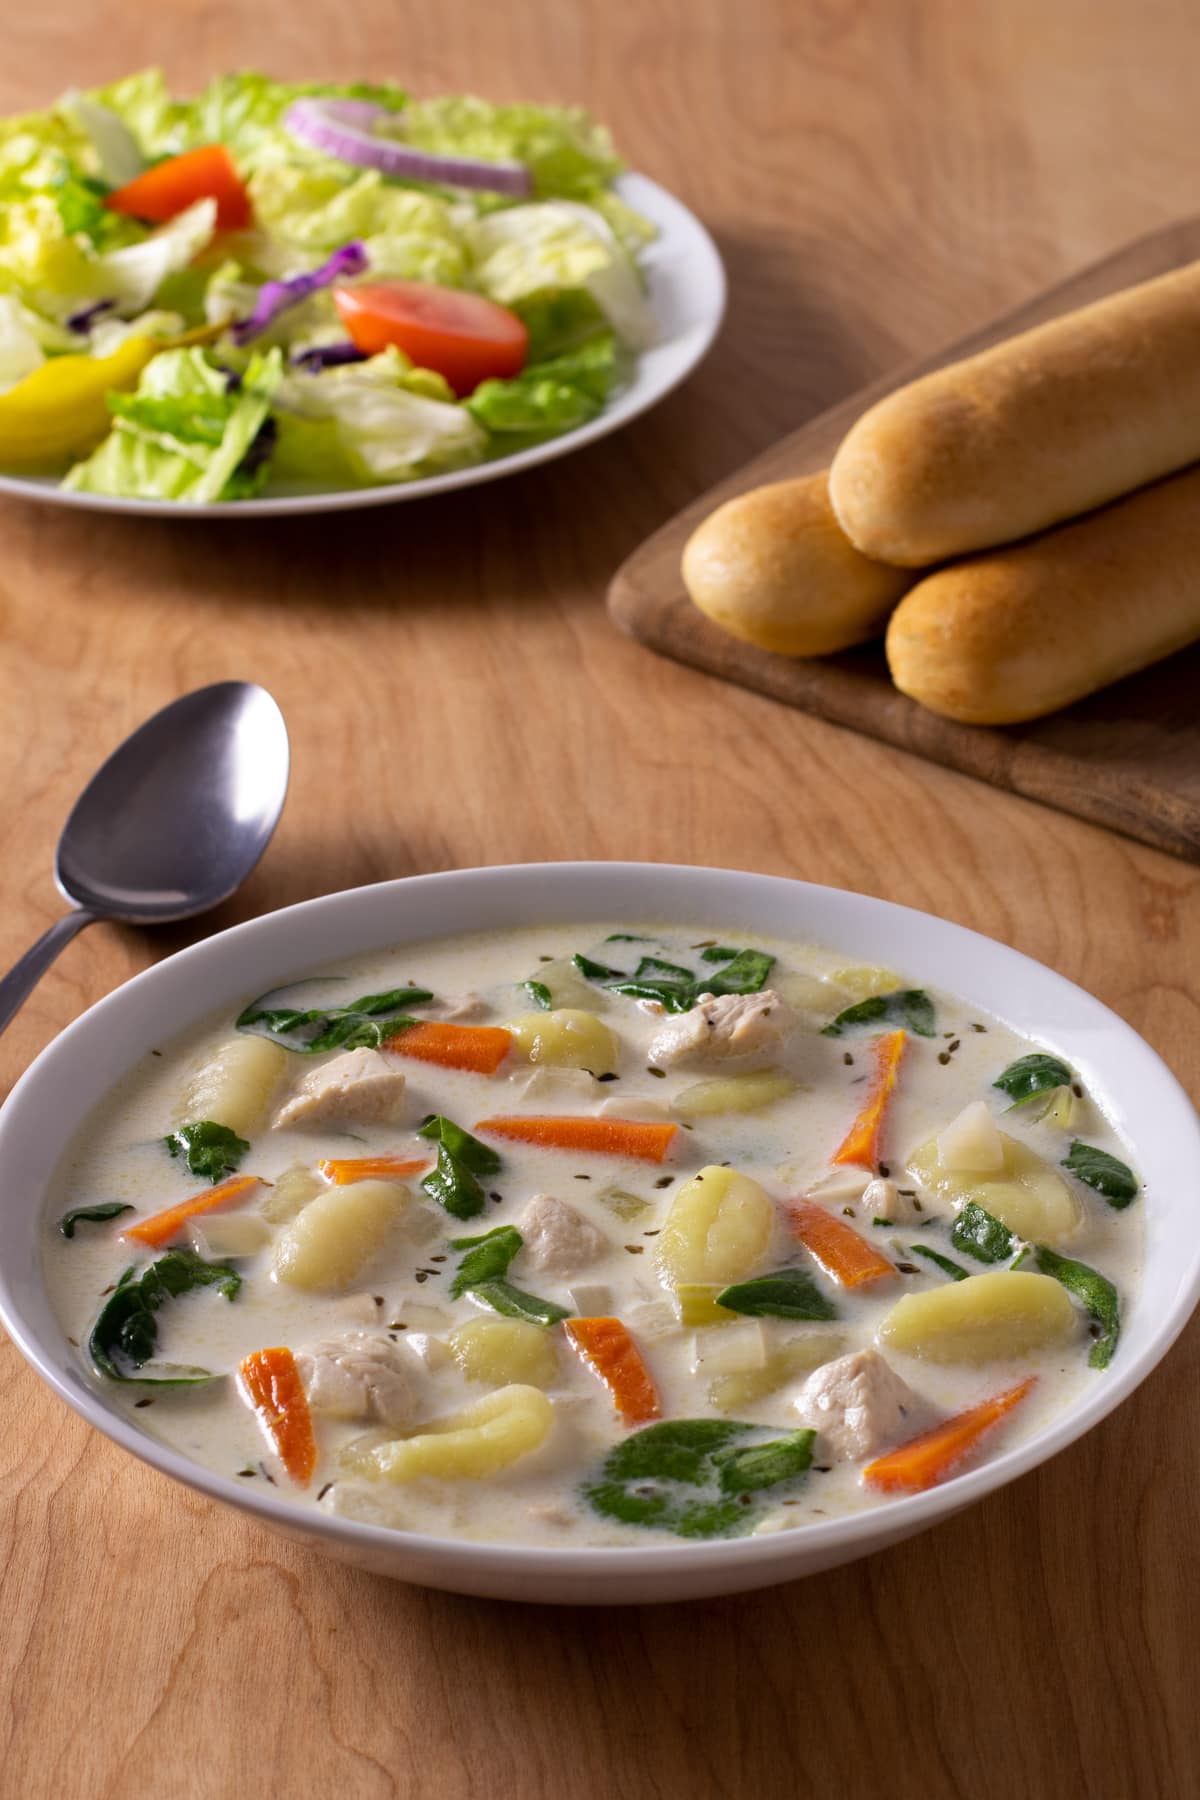 Chicken Gnocchi Soup with spinach and carrots in a creamy broth. Breadsticks and garden salad in background.